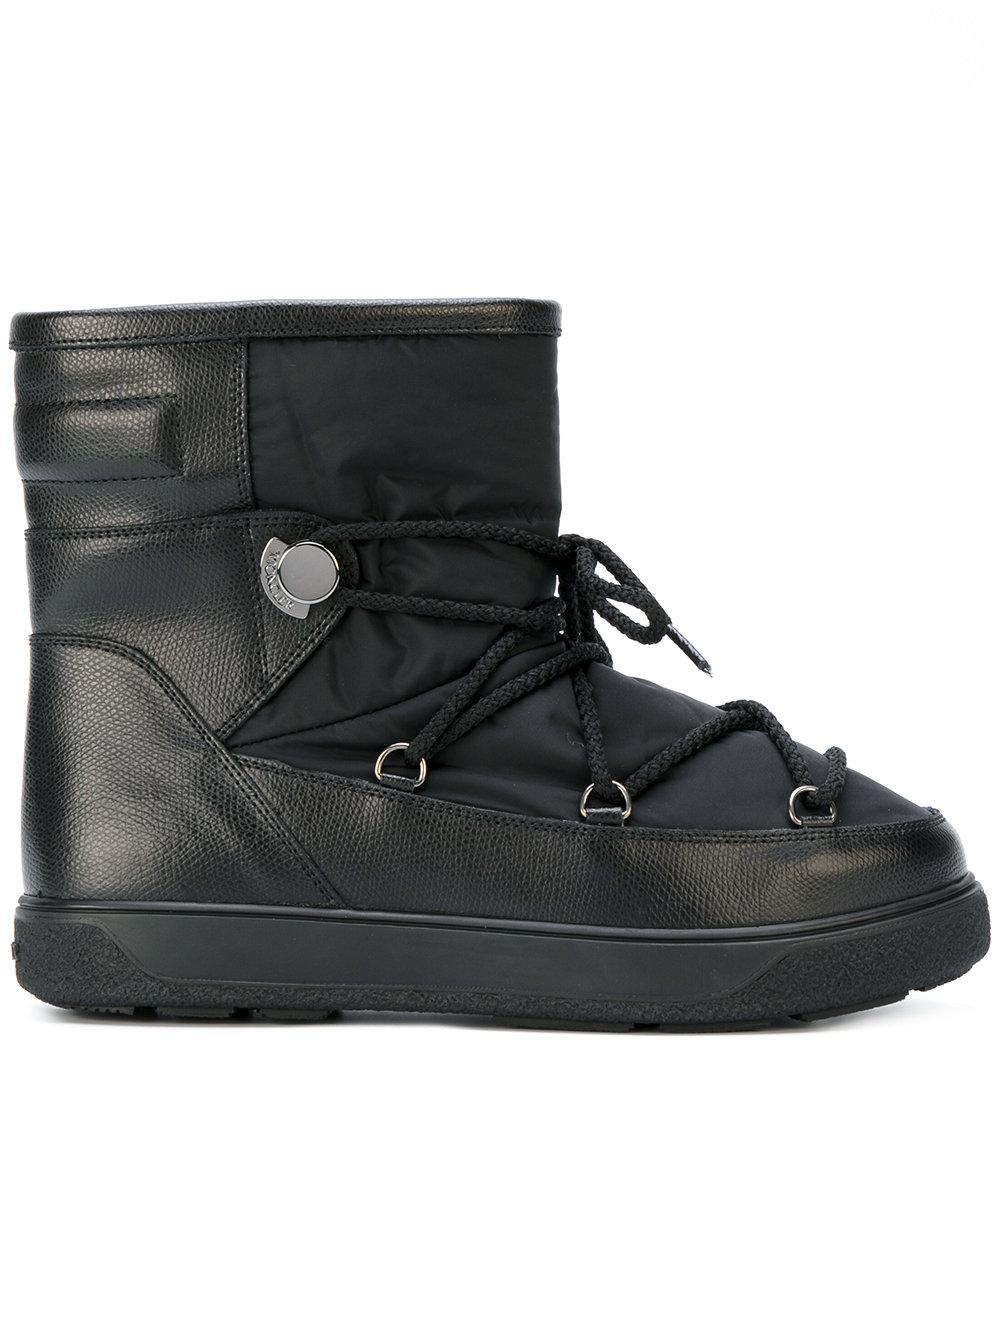 Moncler Synthetic Stephanie Shell And Leather Boots in Black - Lyst